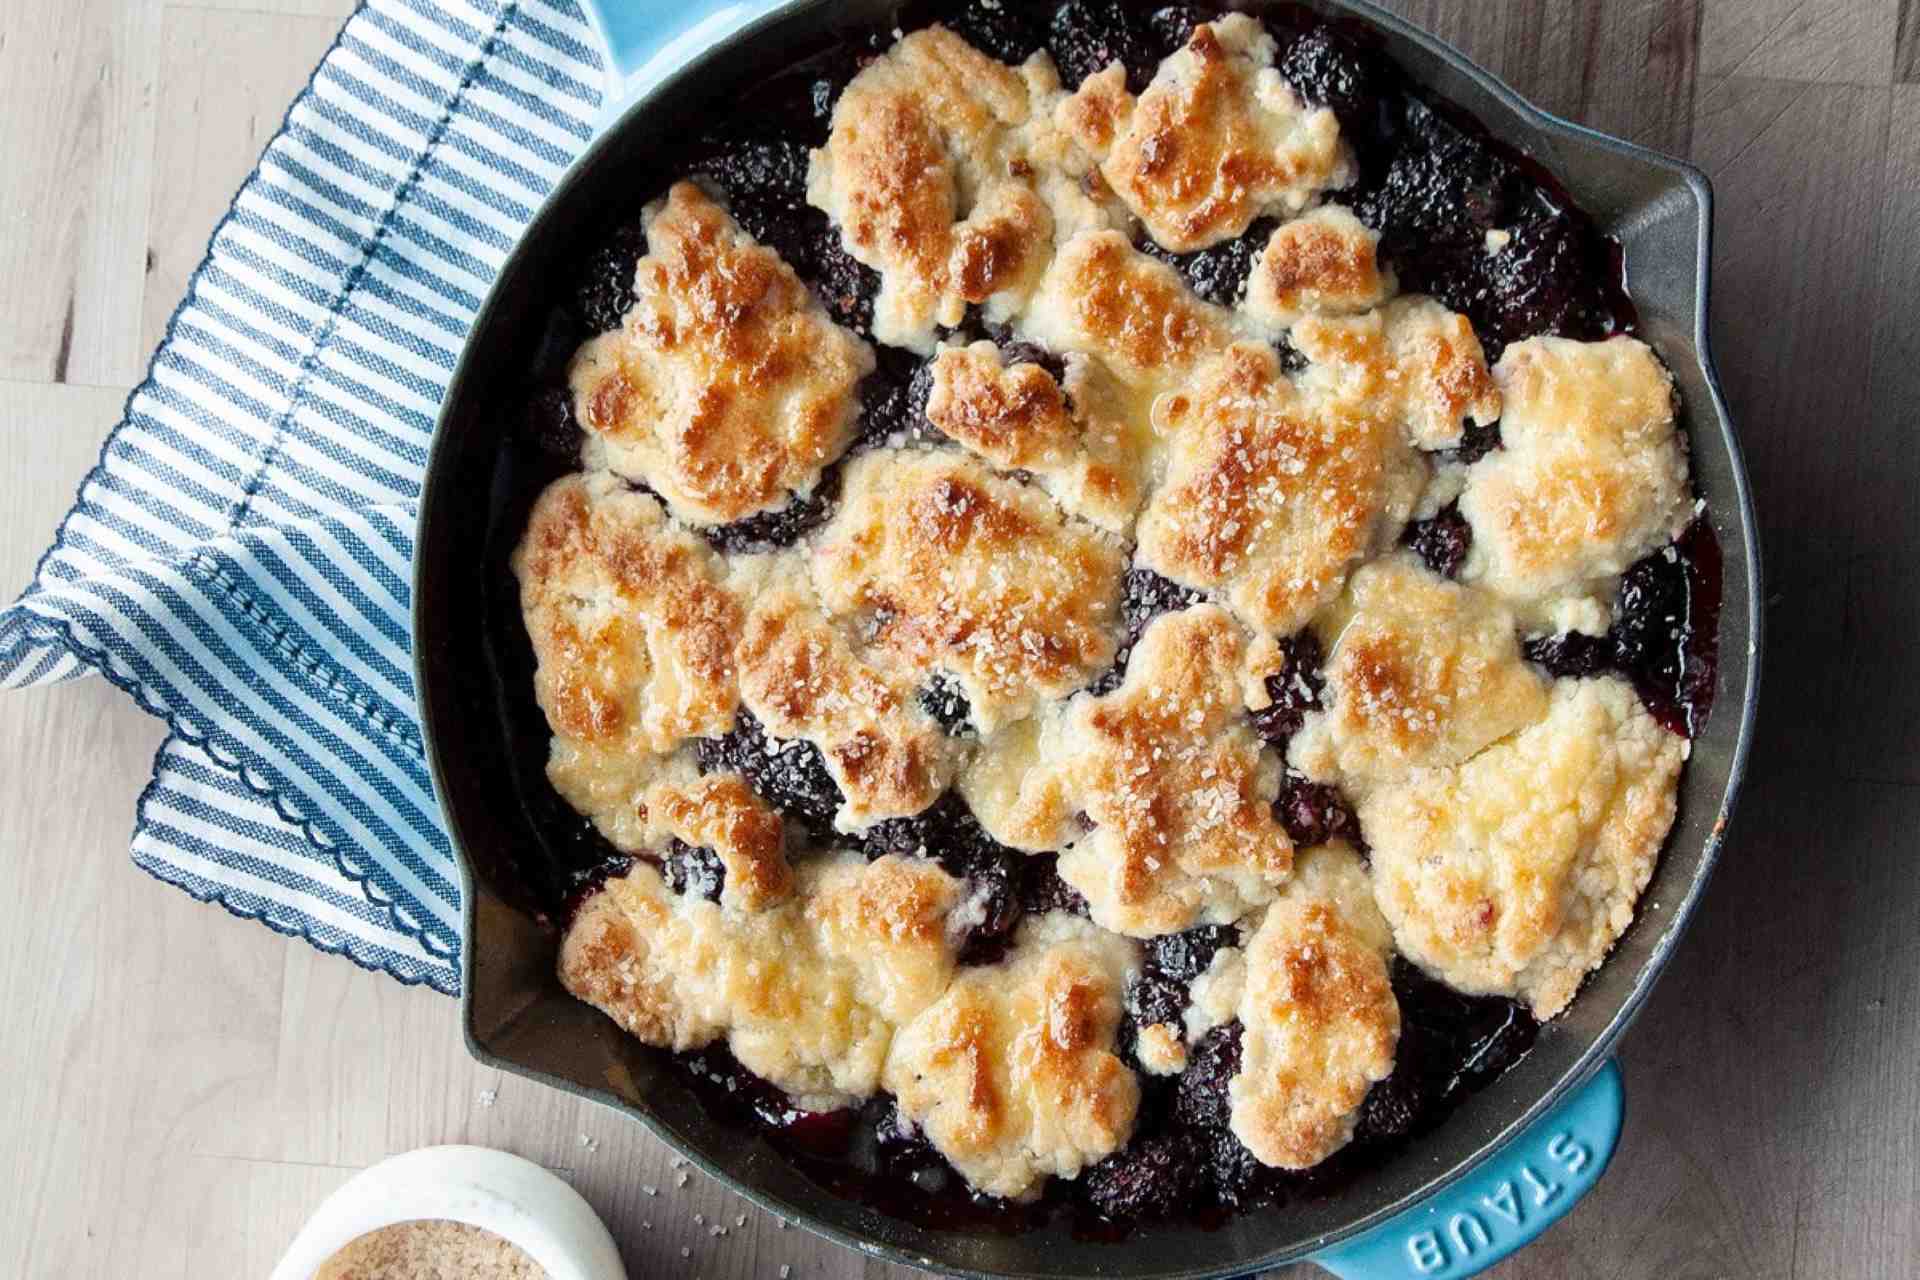 Kick Off Summer With These 9 Cobblers, Crisps and Ooey-Gooey Skillet Cookies